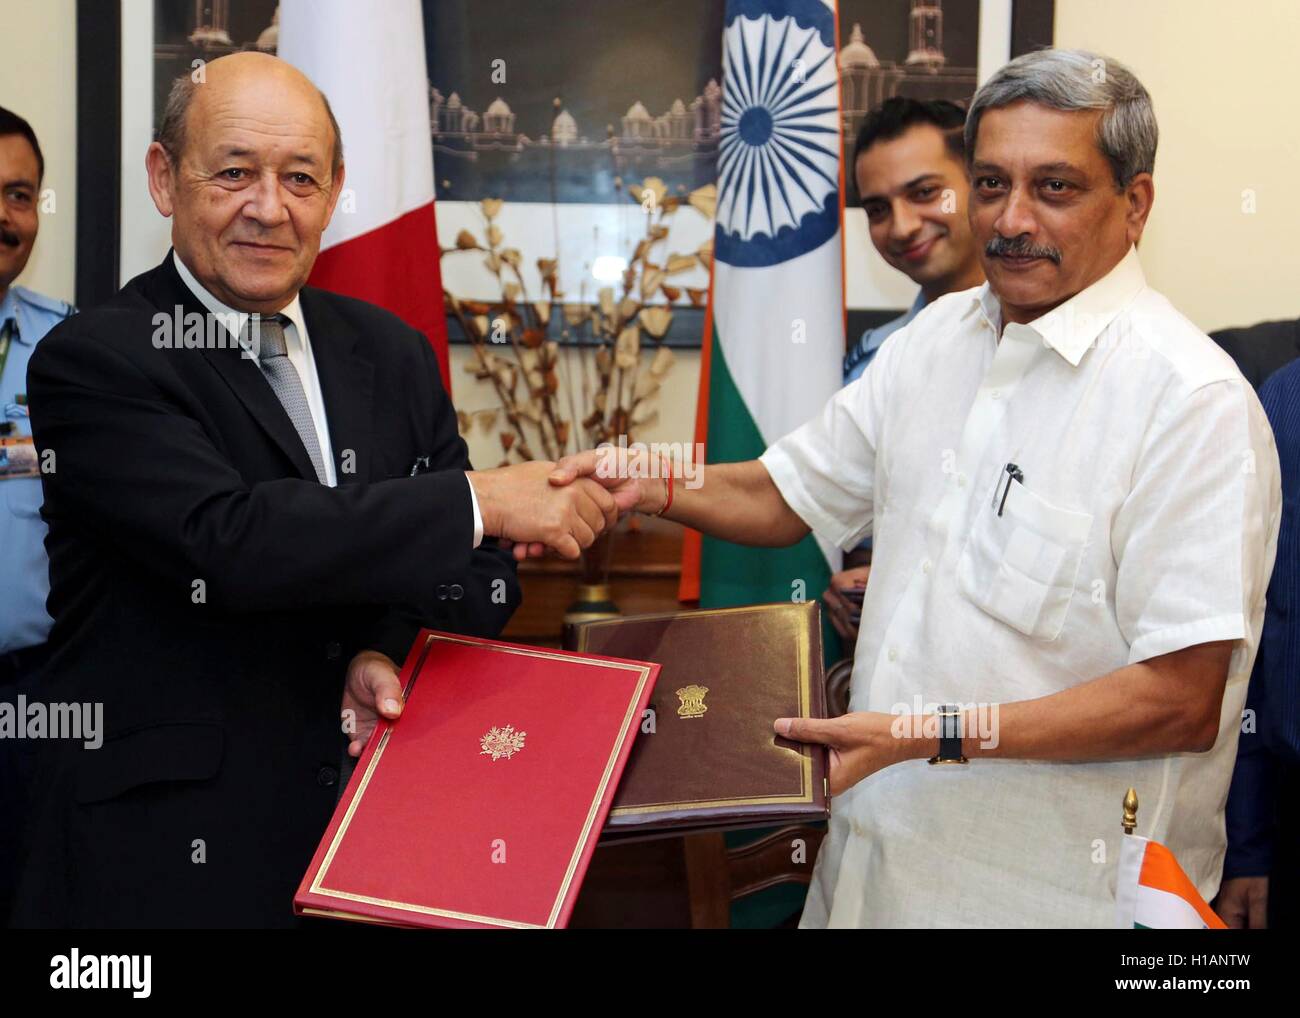 Indian Defense Minister Manohar Parrikar exchanges agreements with French Defence Minister Jean-Yves Le Drian after a signing ceremony to purchase French made Rafale fighter jets September 23, 2016 in New Dehli, India. The deal will supply 36 Dassault Aviation Rafale fighter jets reported to be worth Û7.87 billion ($8.8 billion). Stock Photo